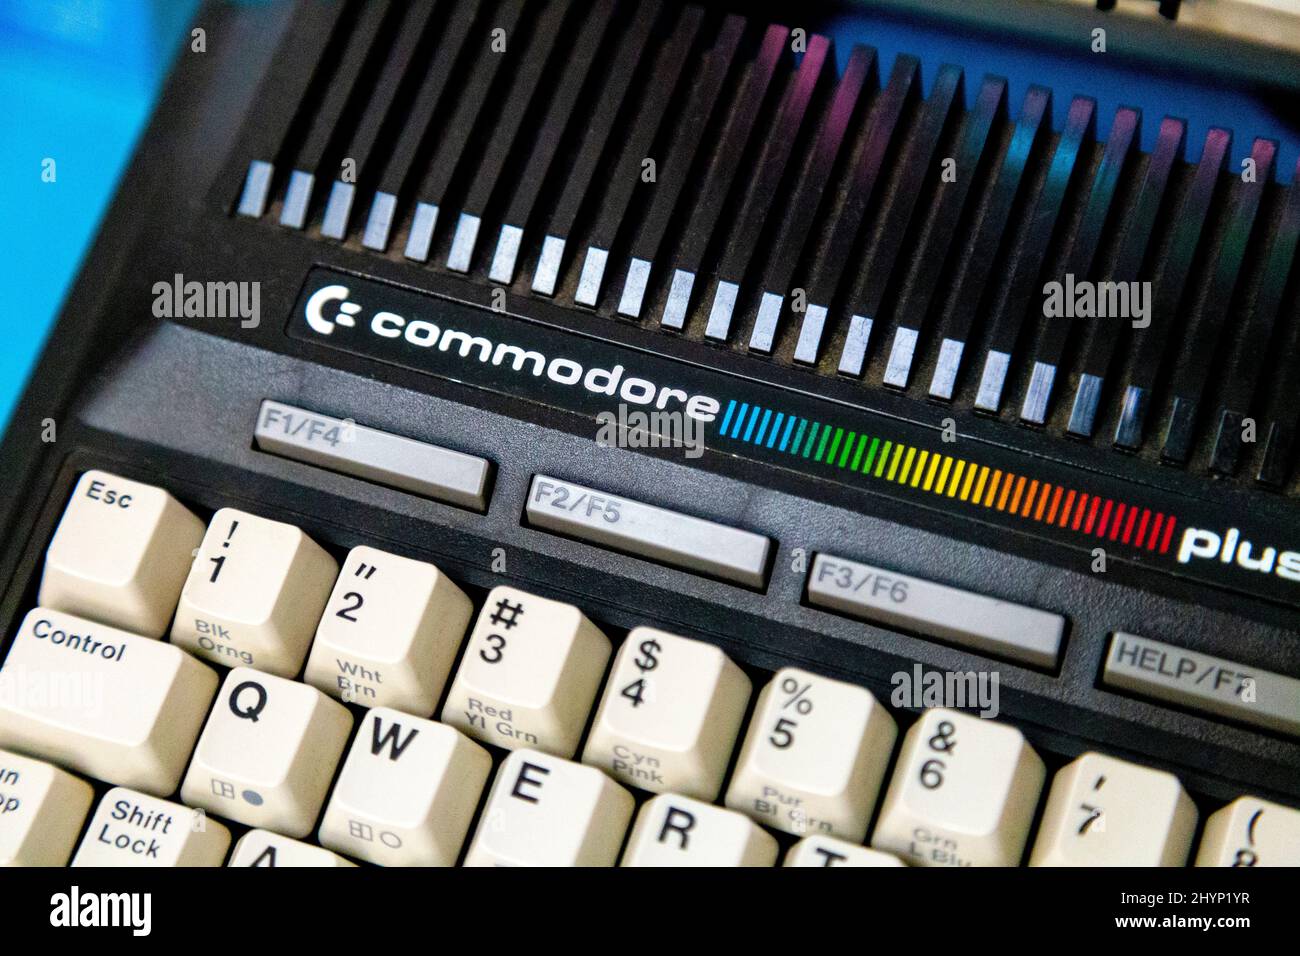 Close-up of Commodore Plus 4 retro computer keyboard on display at the Centre for Computing History, Cambridge, UK Stock Photo